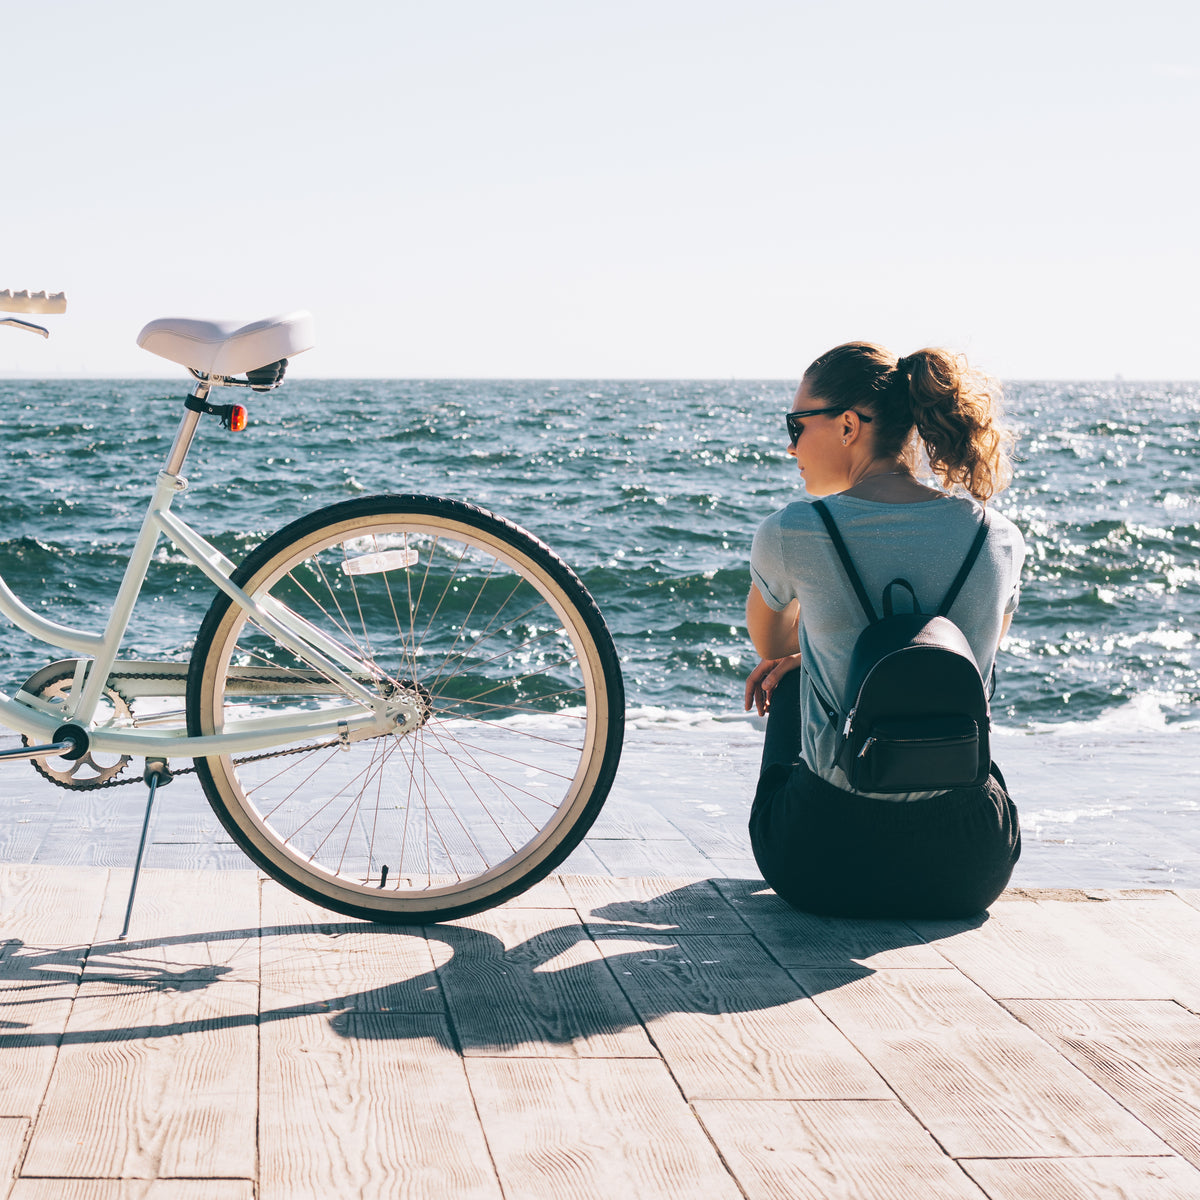 Buying Guide: 10 Must-Have Beach Cruiser Accessories